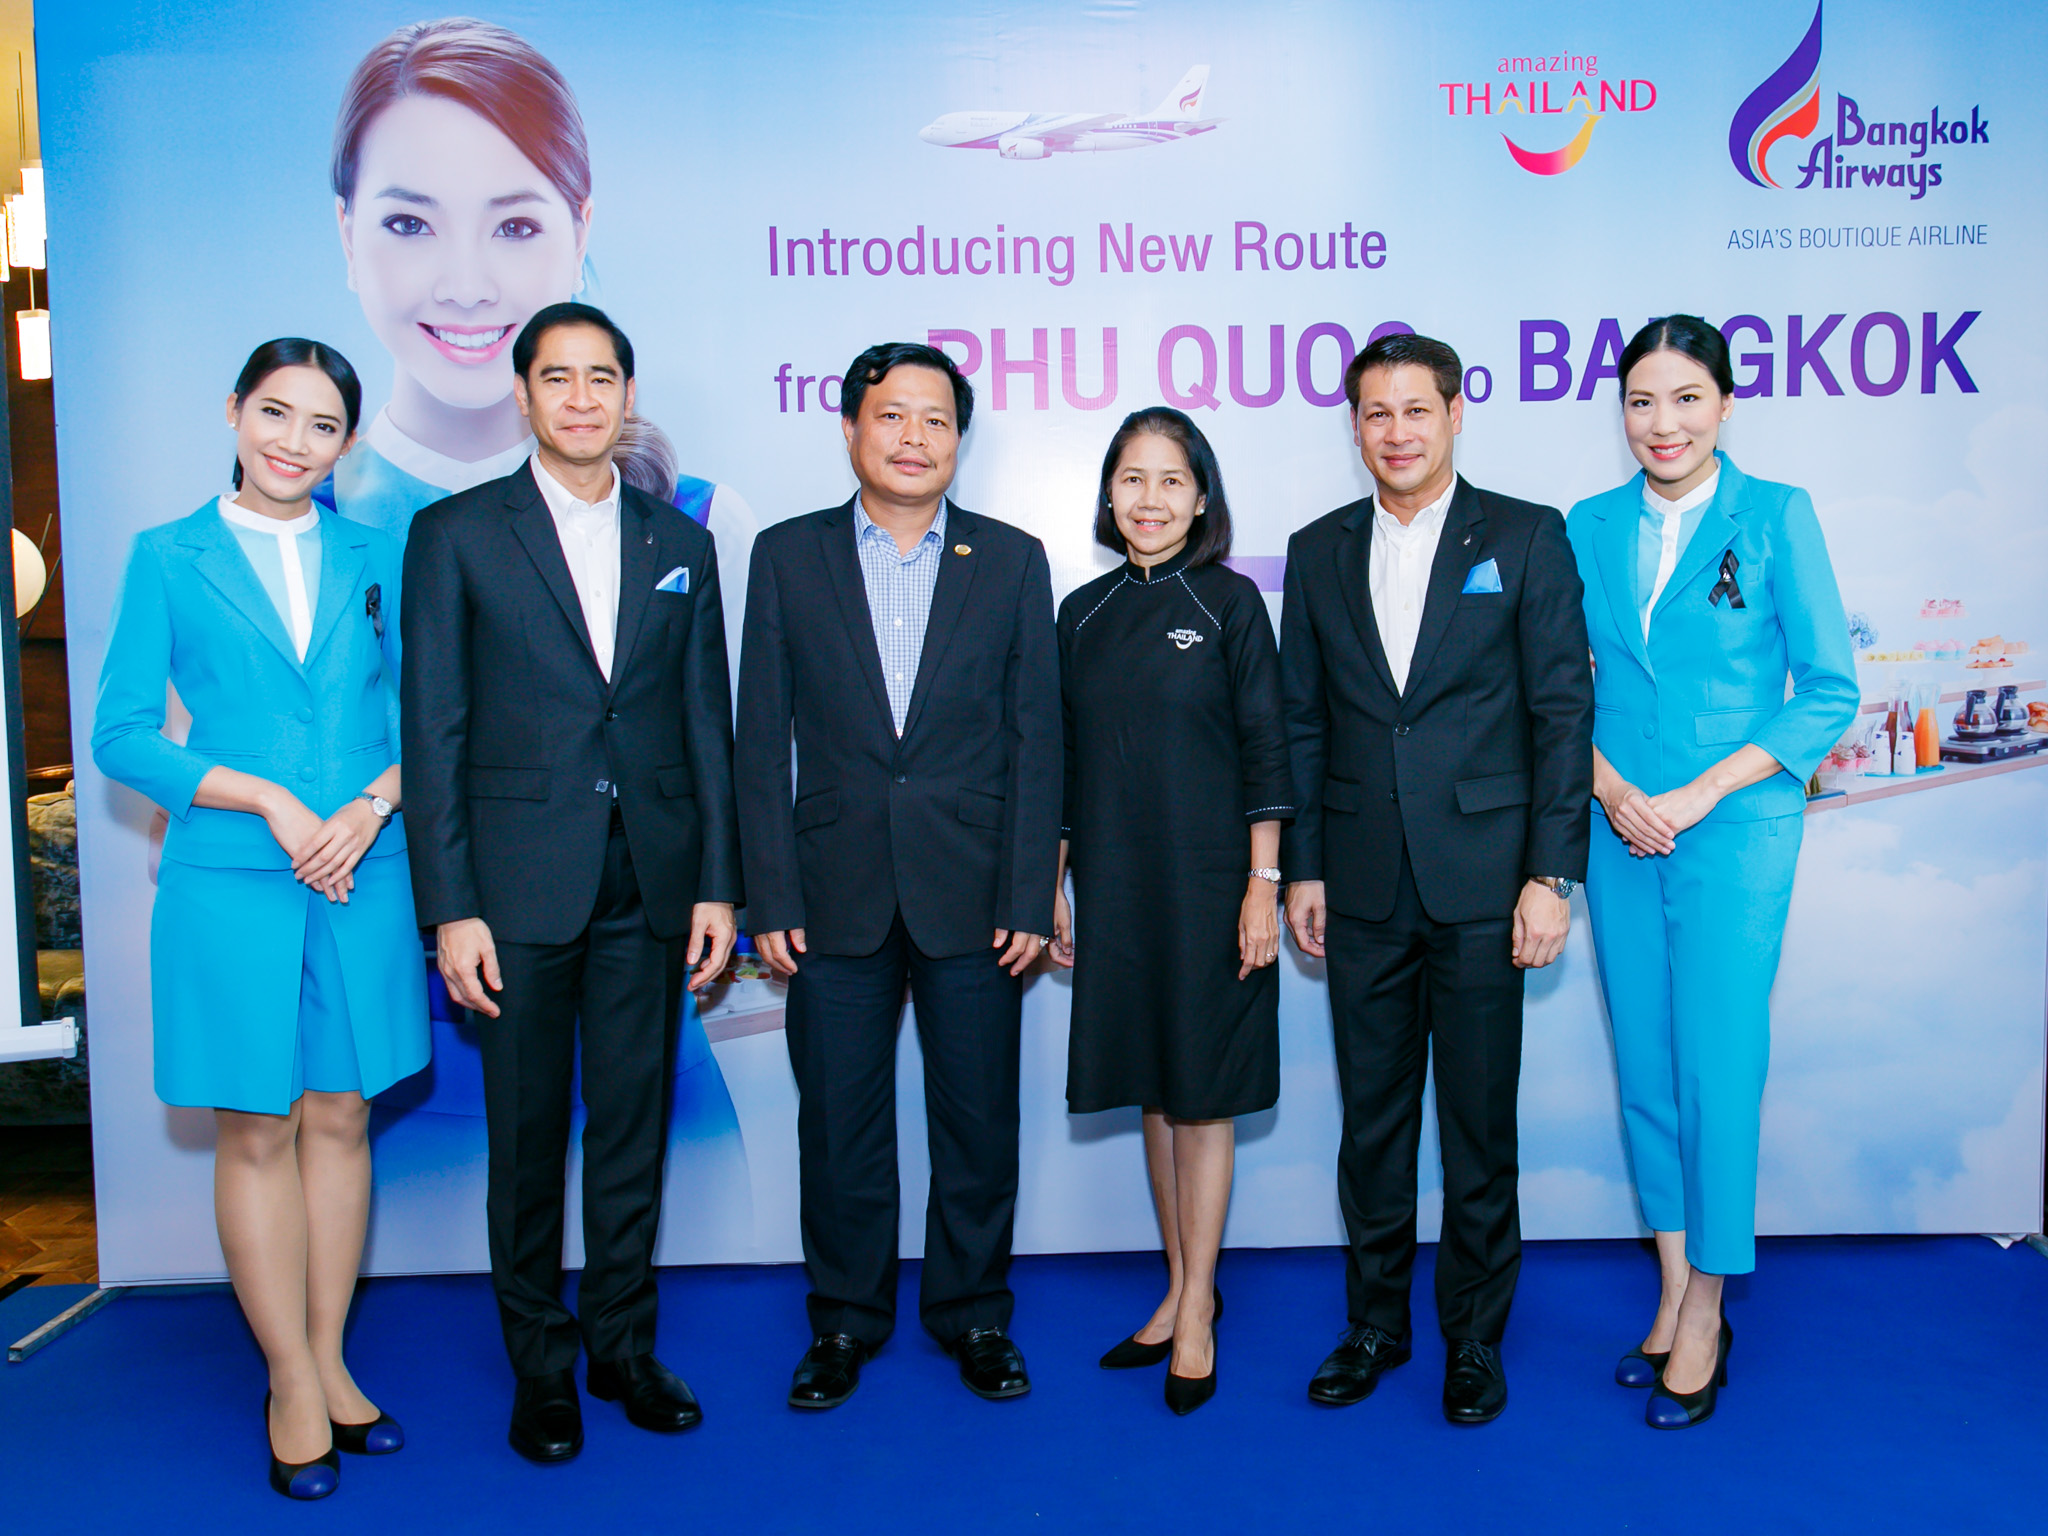 ​Thai airline to launch Phu Quoc-Bangkok nonstop service